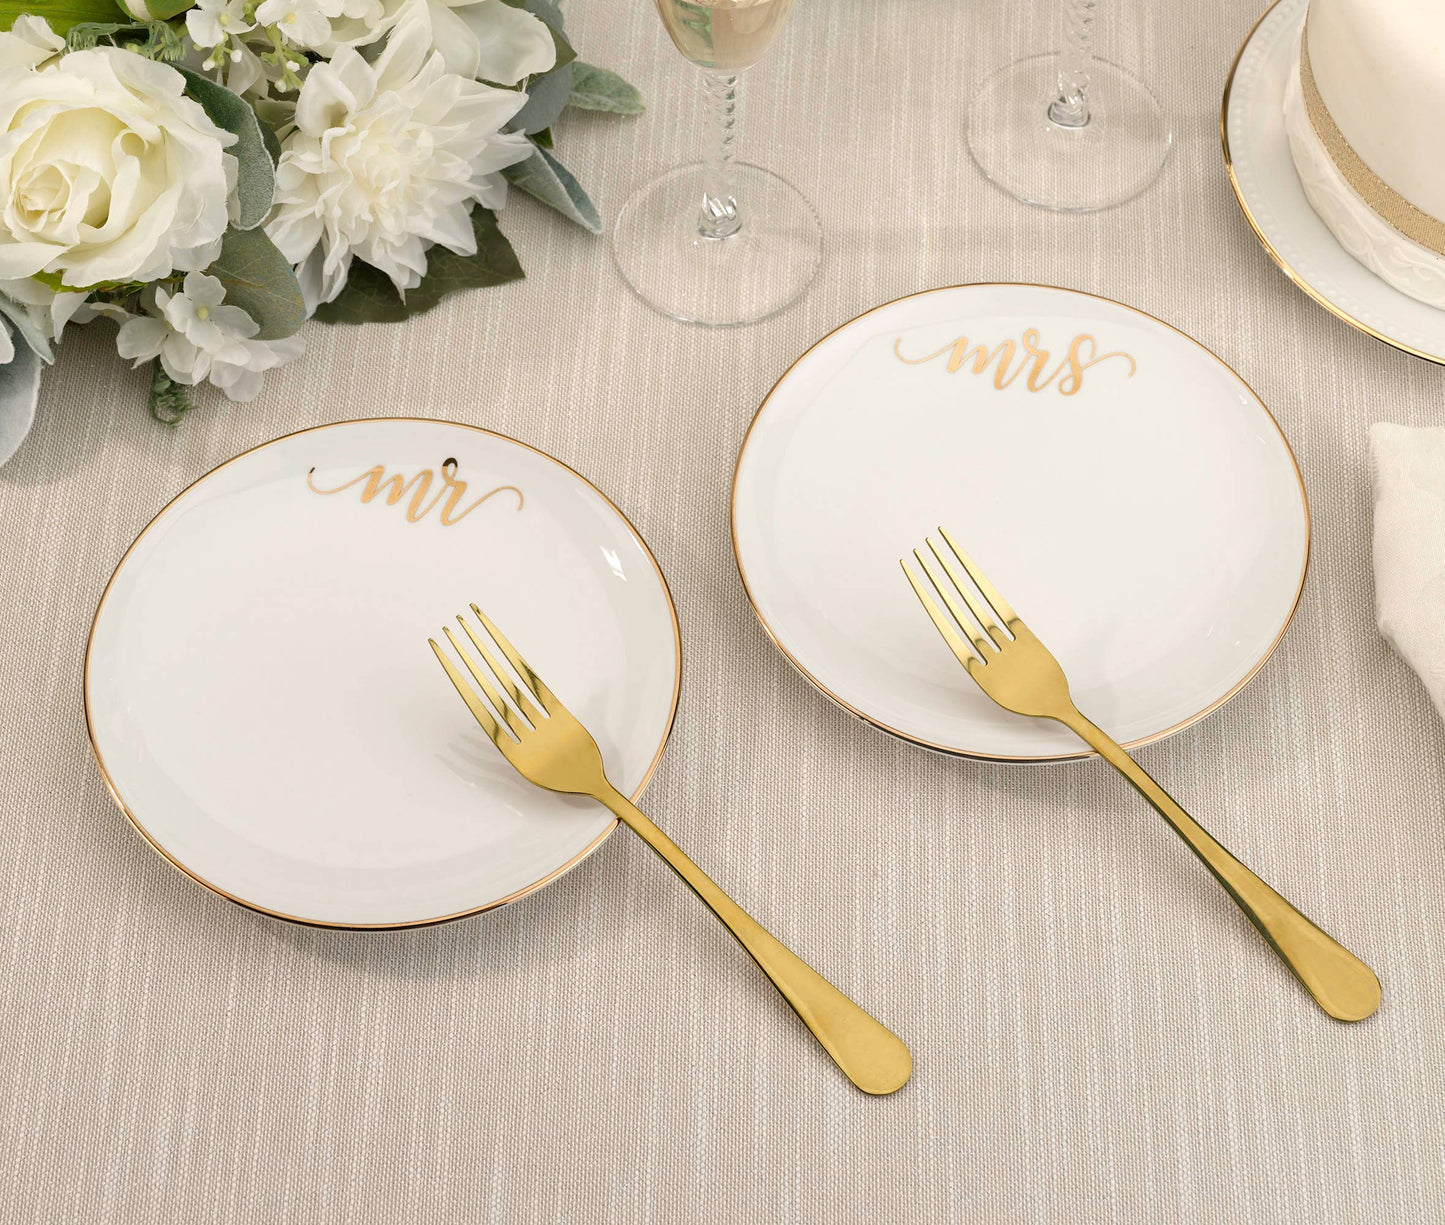 Lillian Rose Mr and Mrs Cake Plates with 2 Forks